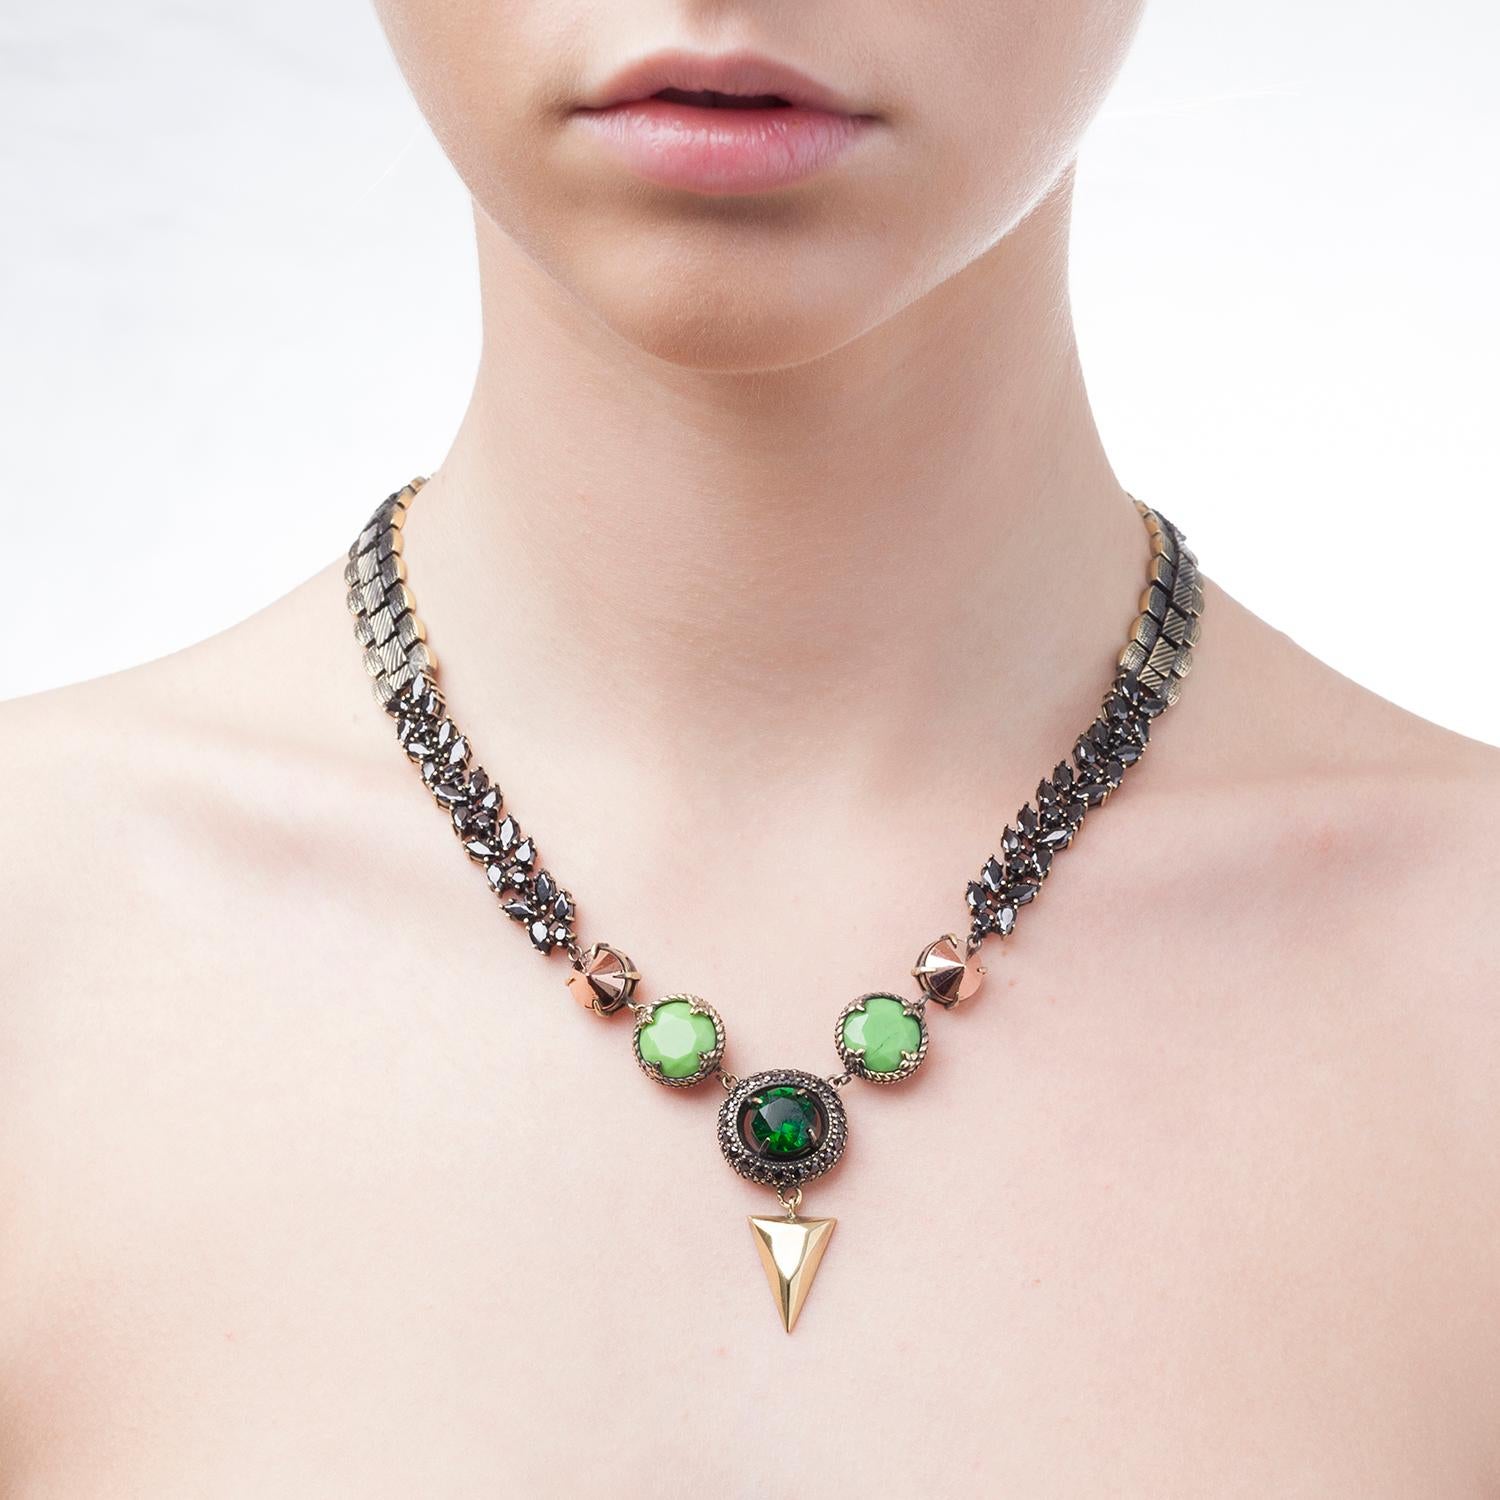 It's all about Iosselliani love for mixing details and materials for this chain necklace. Enriched with two sided of jet zircons flur chain, the necklace from Iosselliani features a 10K rose gold plated brass chain, green glass round stones. A green